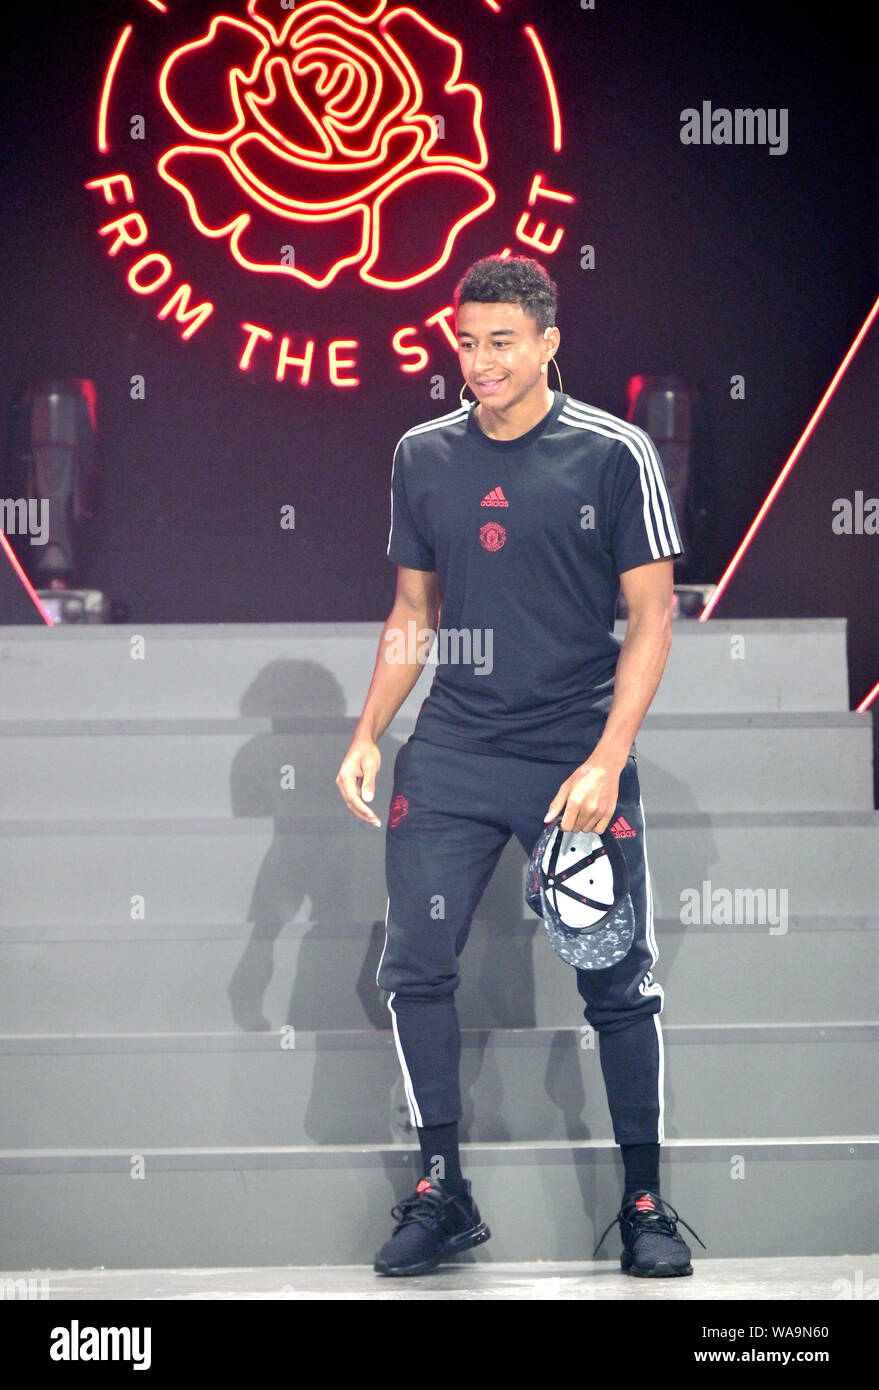 Jesse Lingard of Manchester United F.C. of Premier League attends a  promotional event for adidas during 2019 pre-season tour in Shanghai,  China, 23 Ju Stock Photo - Alamy